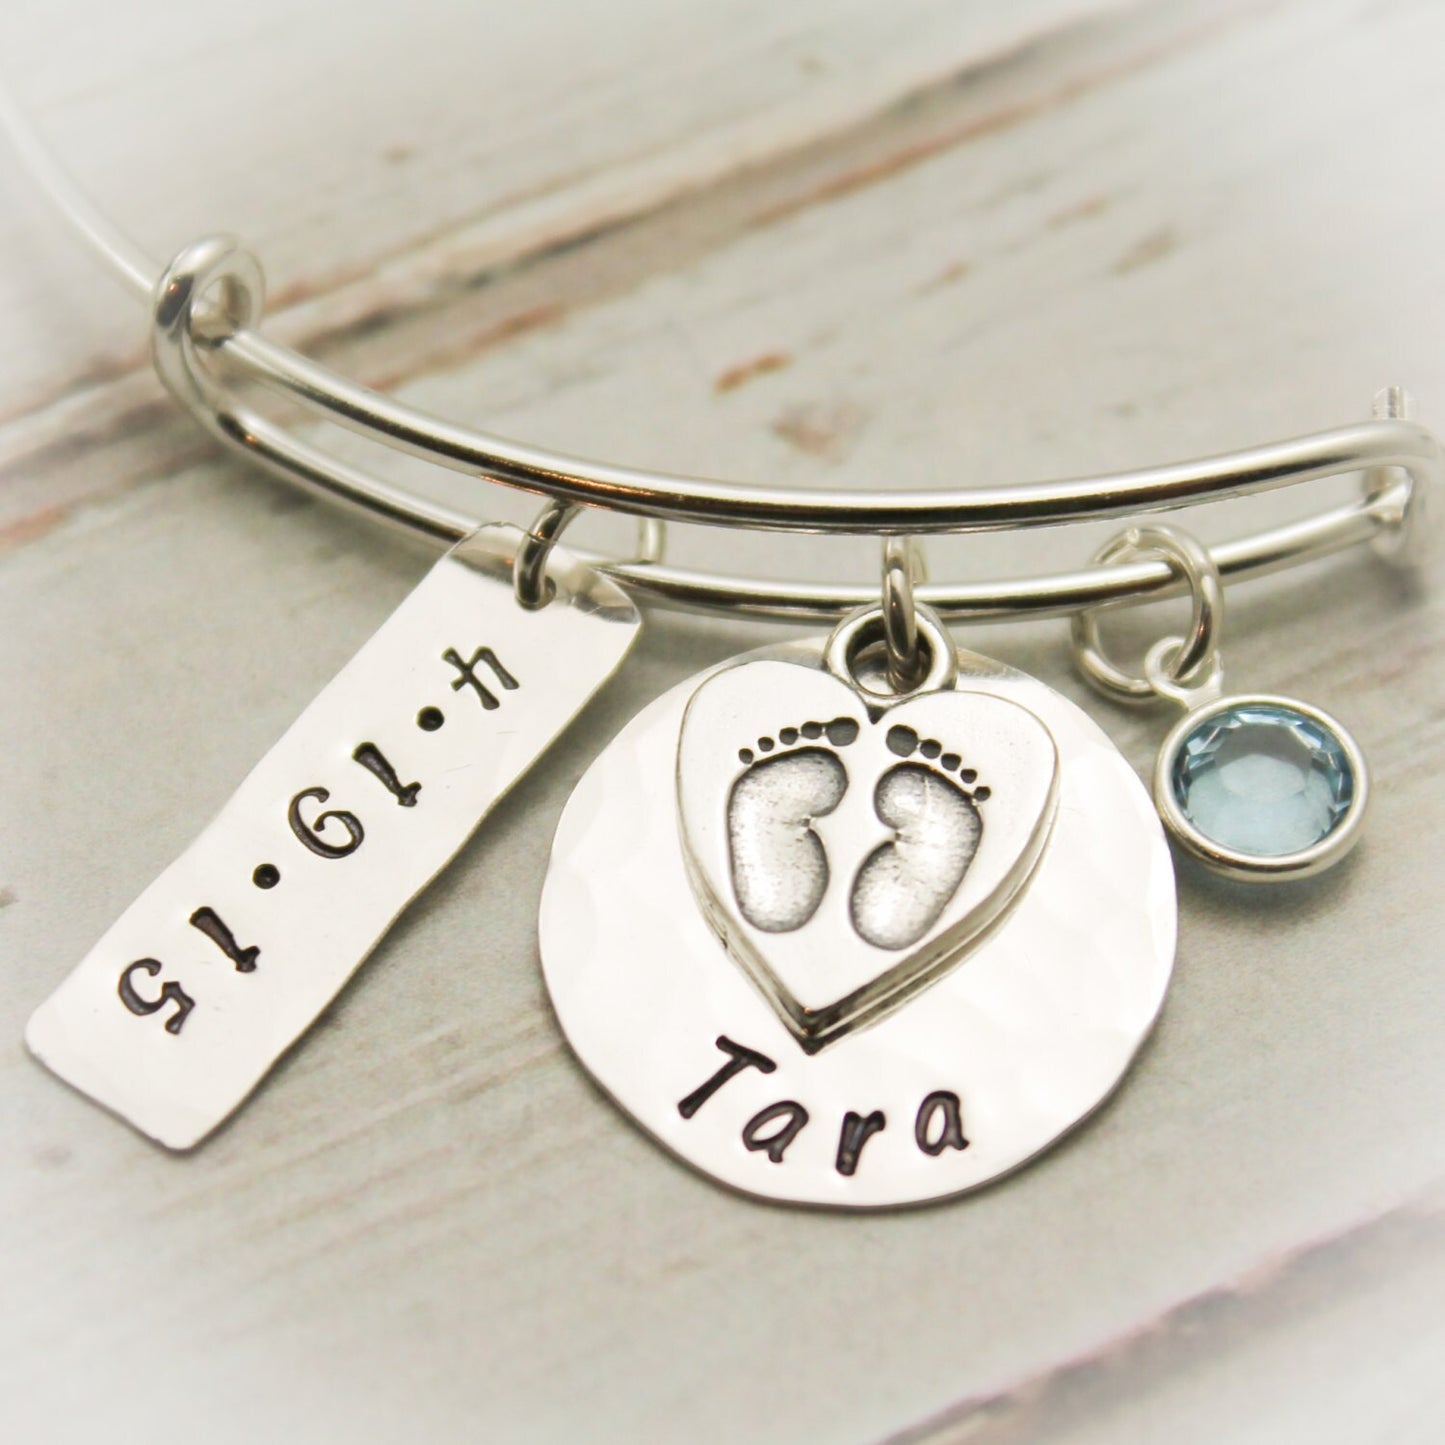 New Mommy Bangle with Footprint Charm in Sterling Silver Personalized Hand Stamped Jewelry